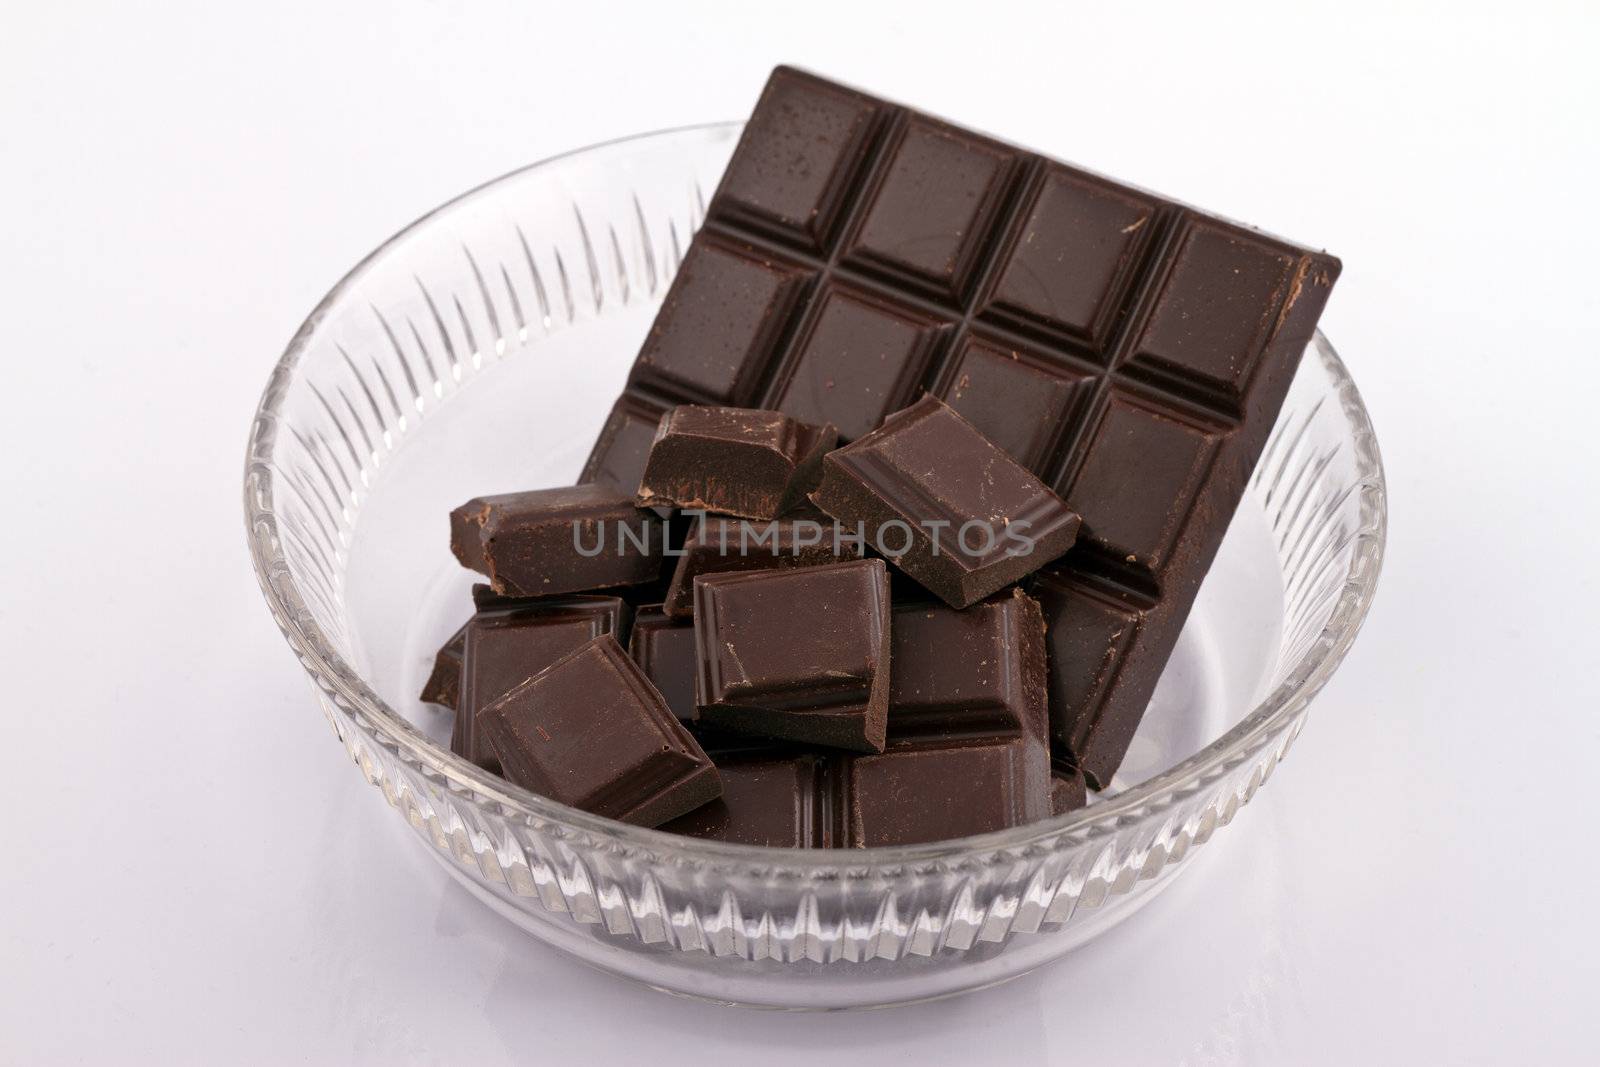 Chocolated pieces in glass bowl on white background